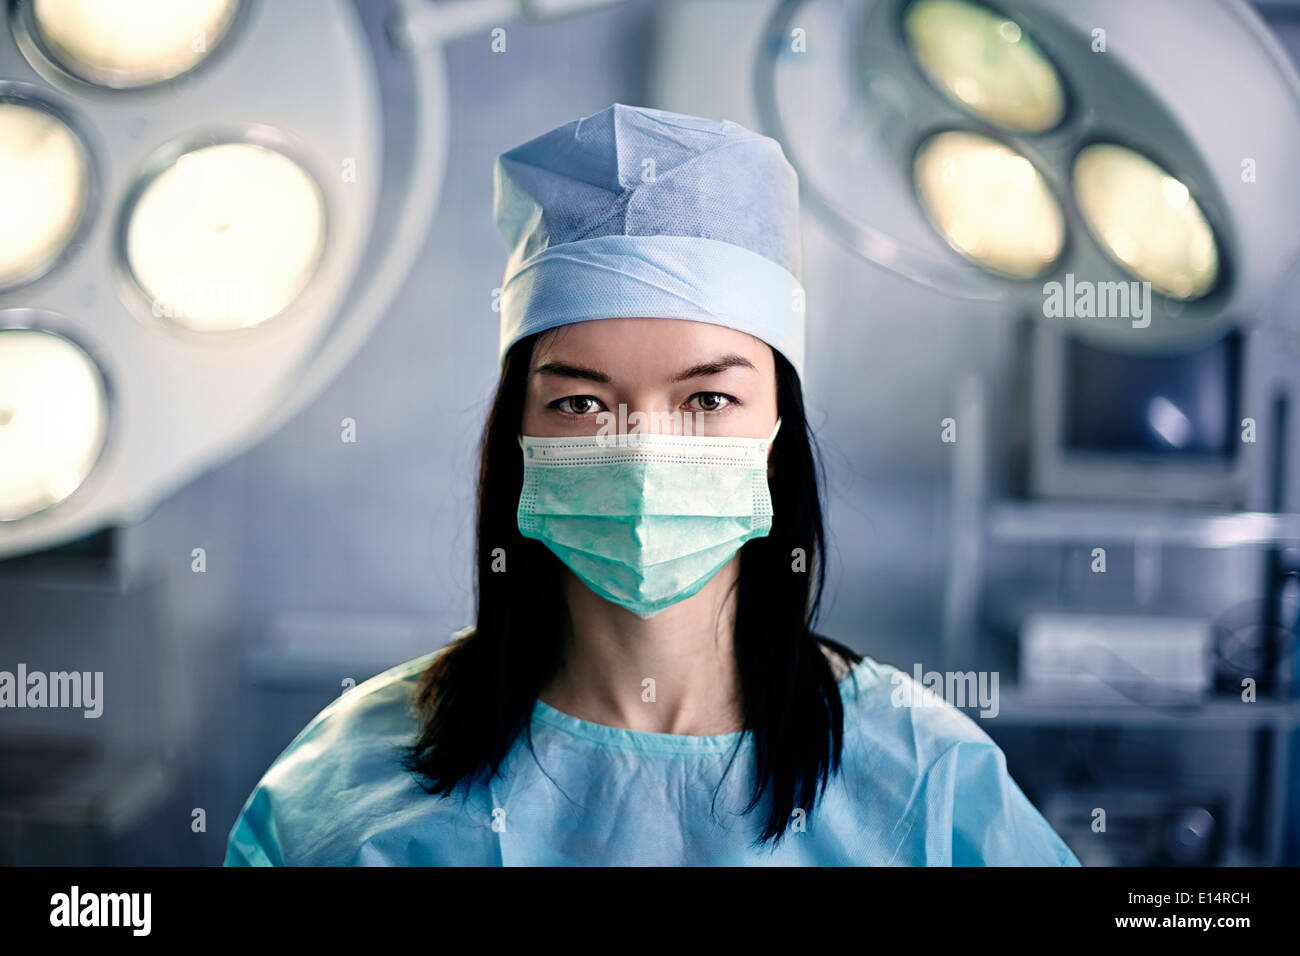 Caucasian surgeon wearing mask in operating room Banque D'Images